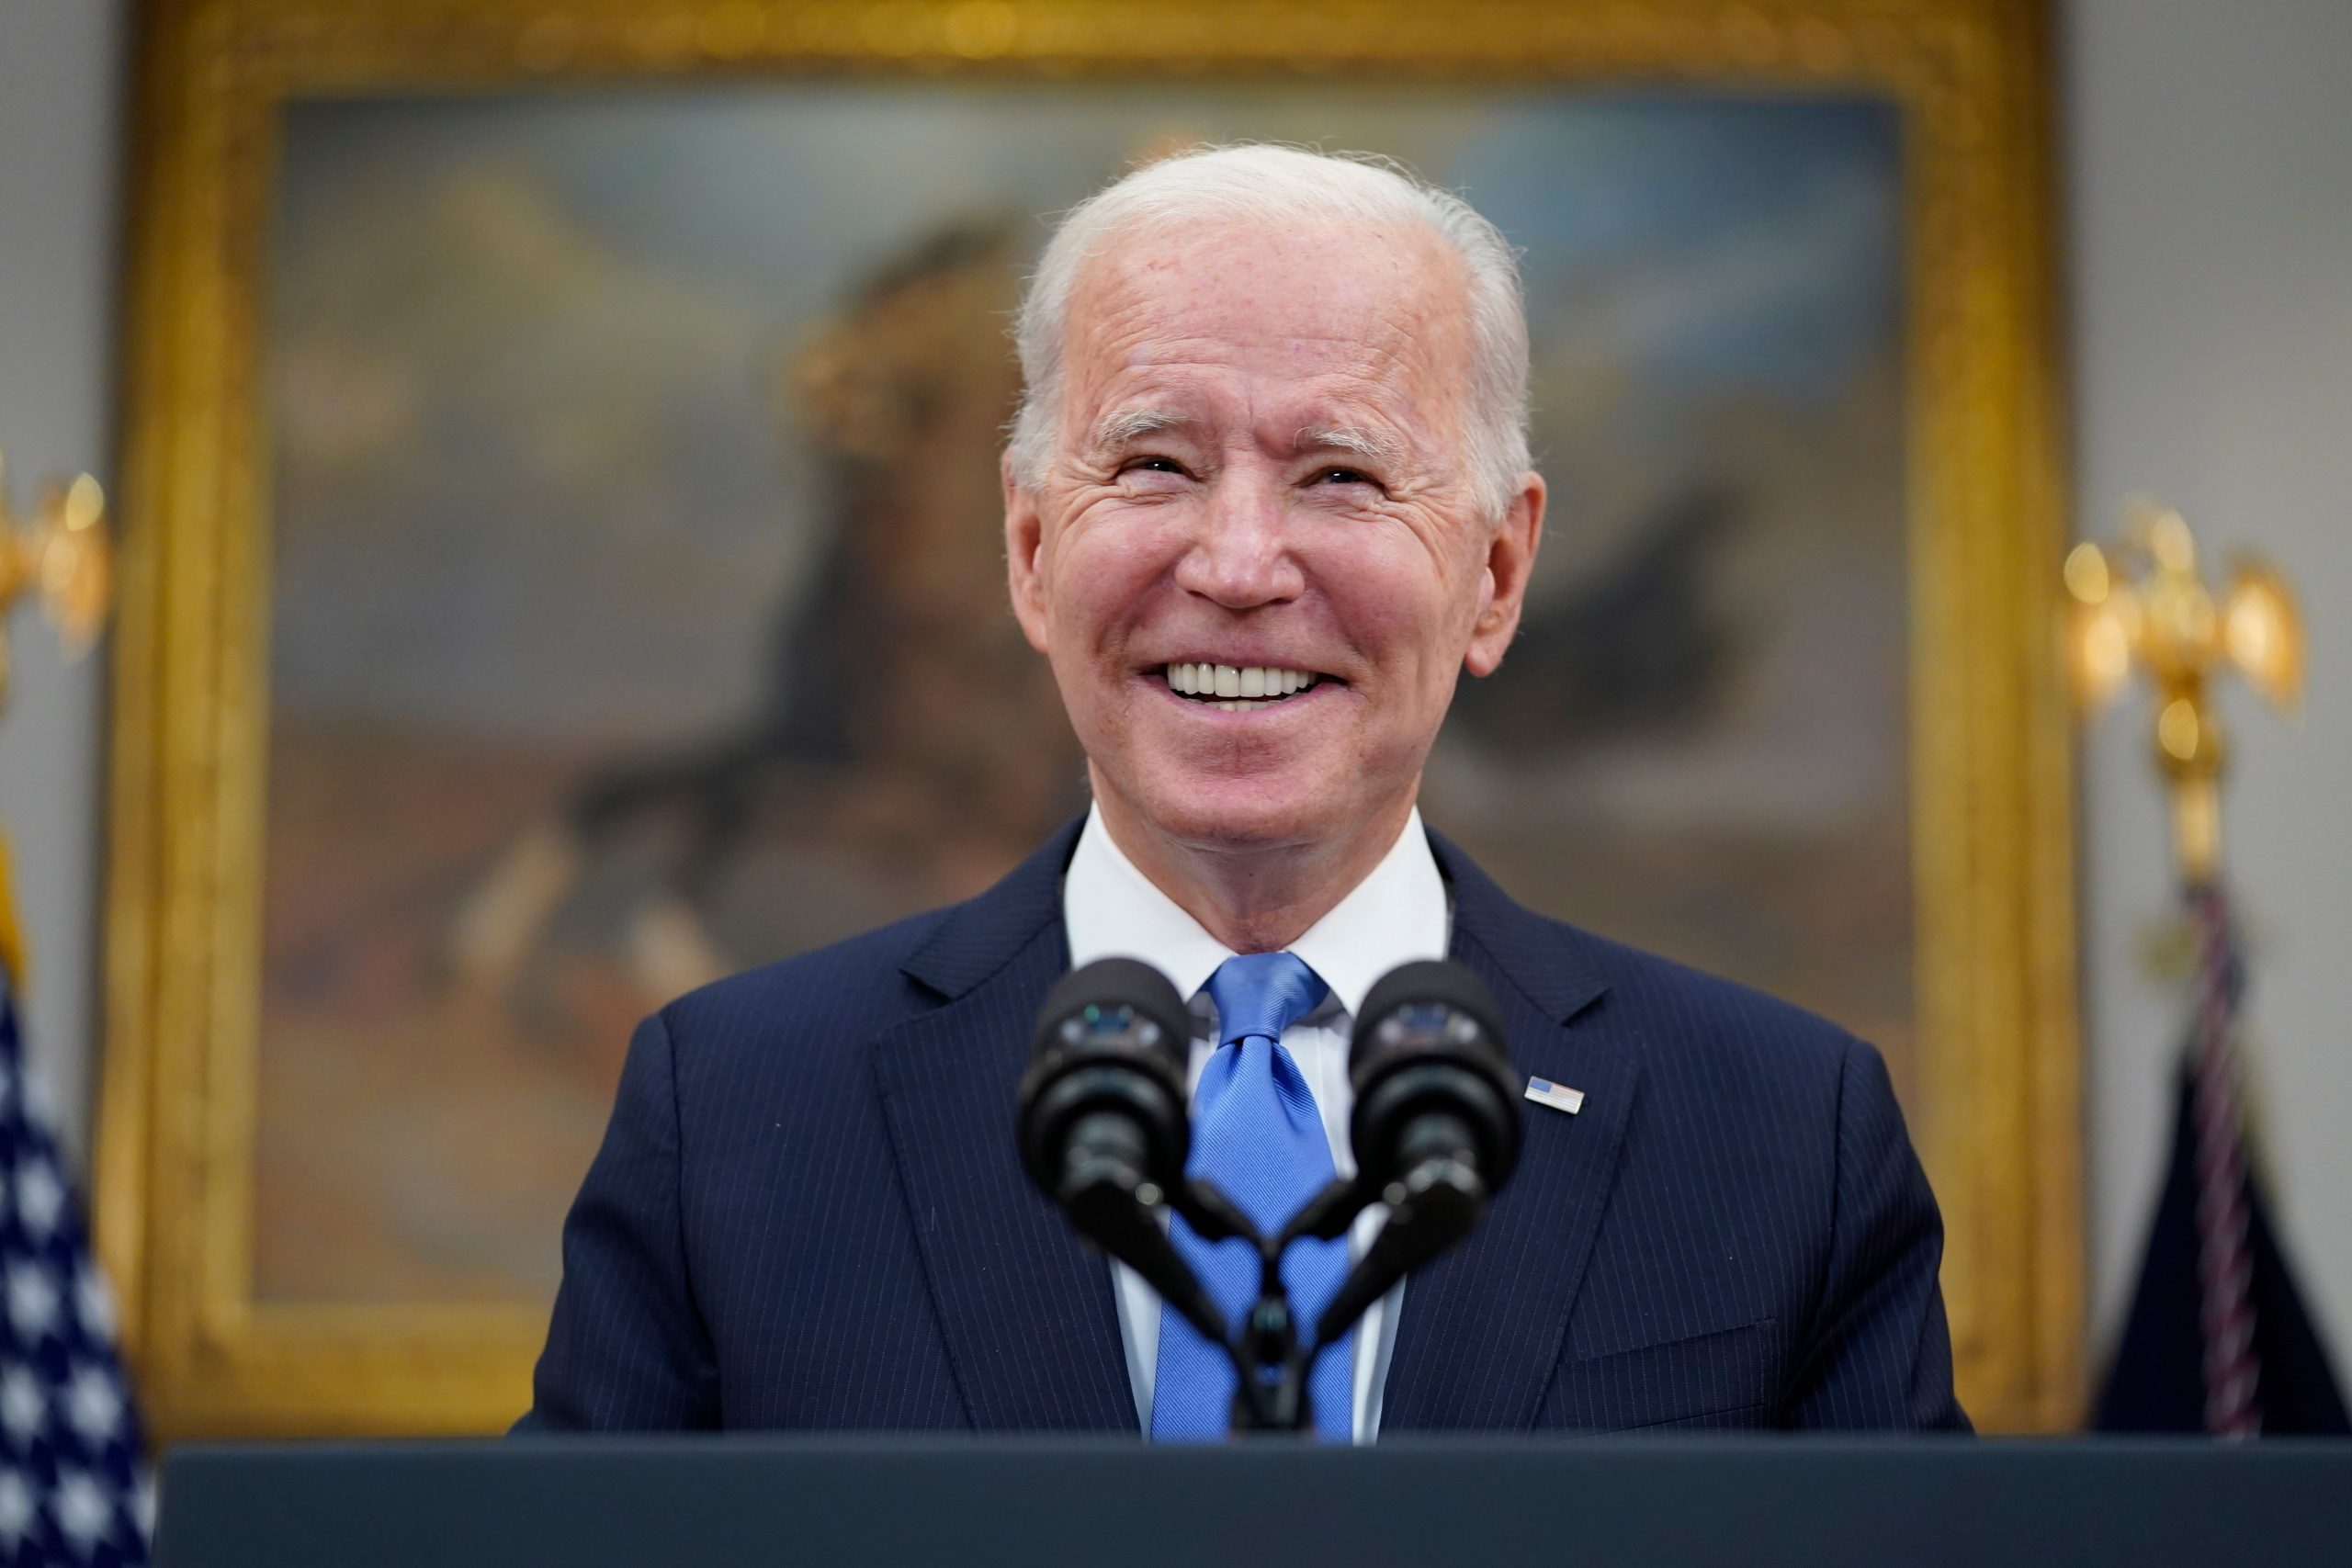 Joe Biden, in phone call with Netanyahu, supports Israels right to self defence